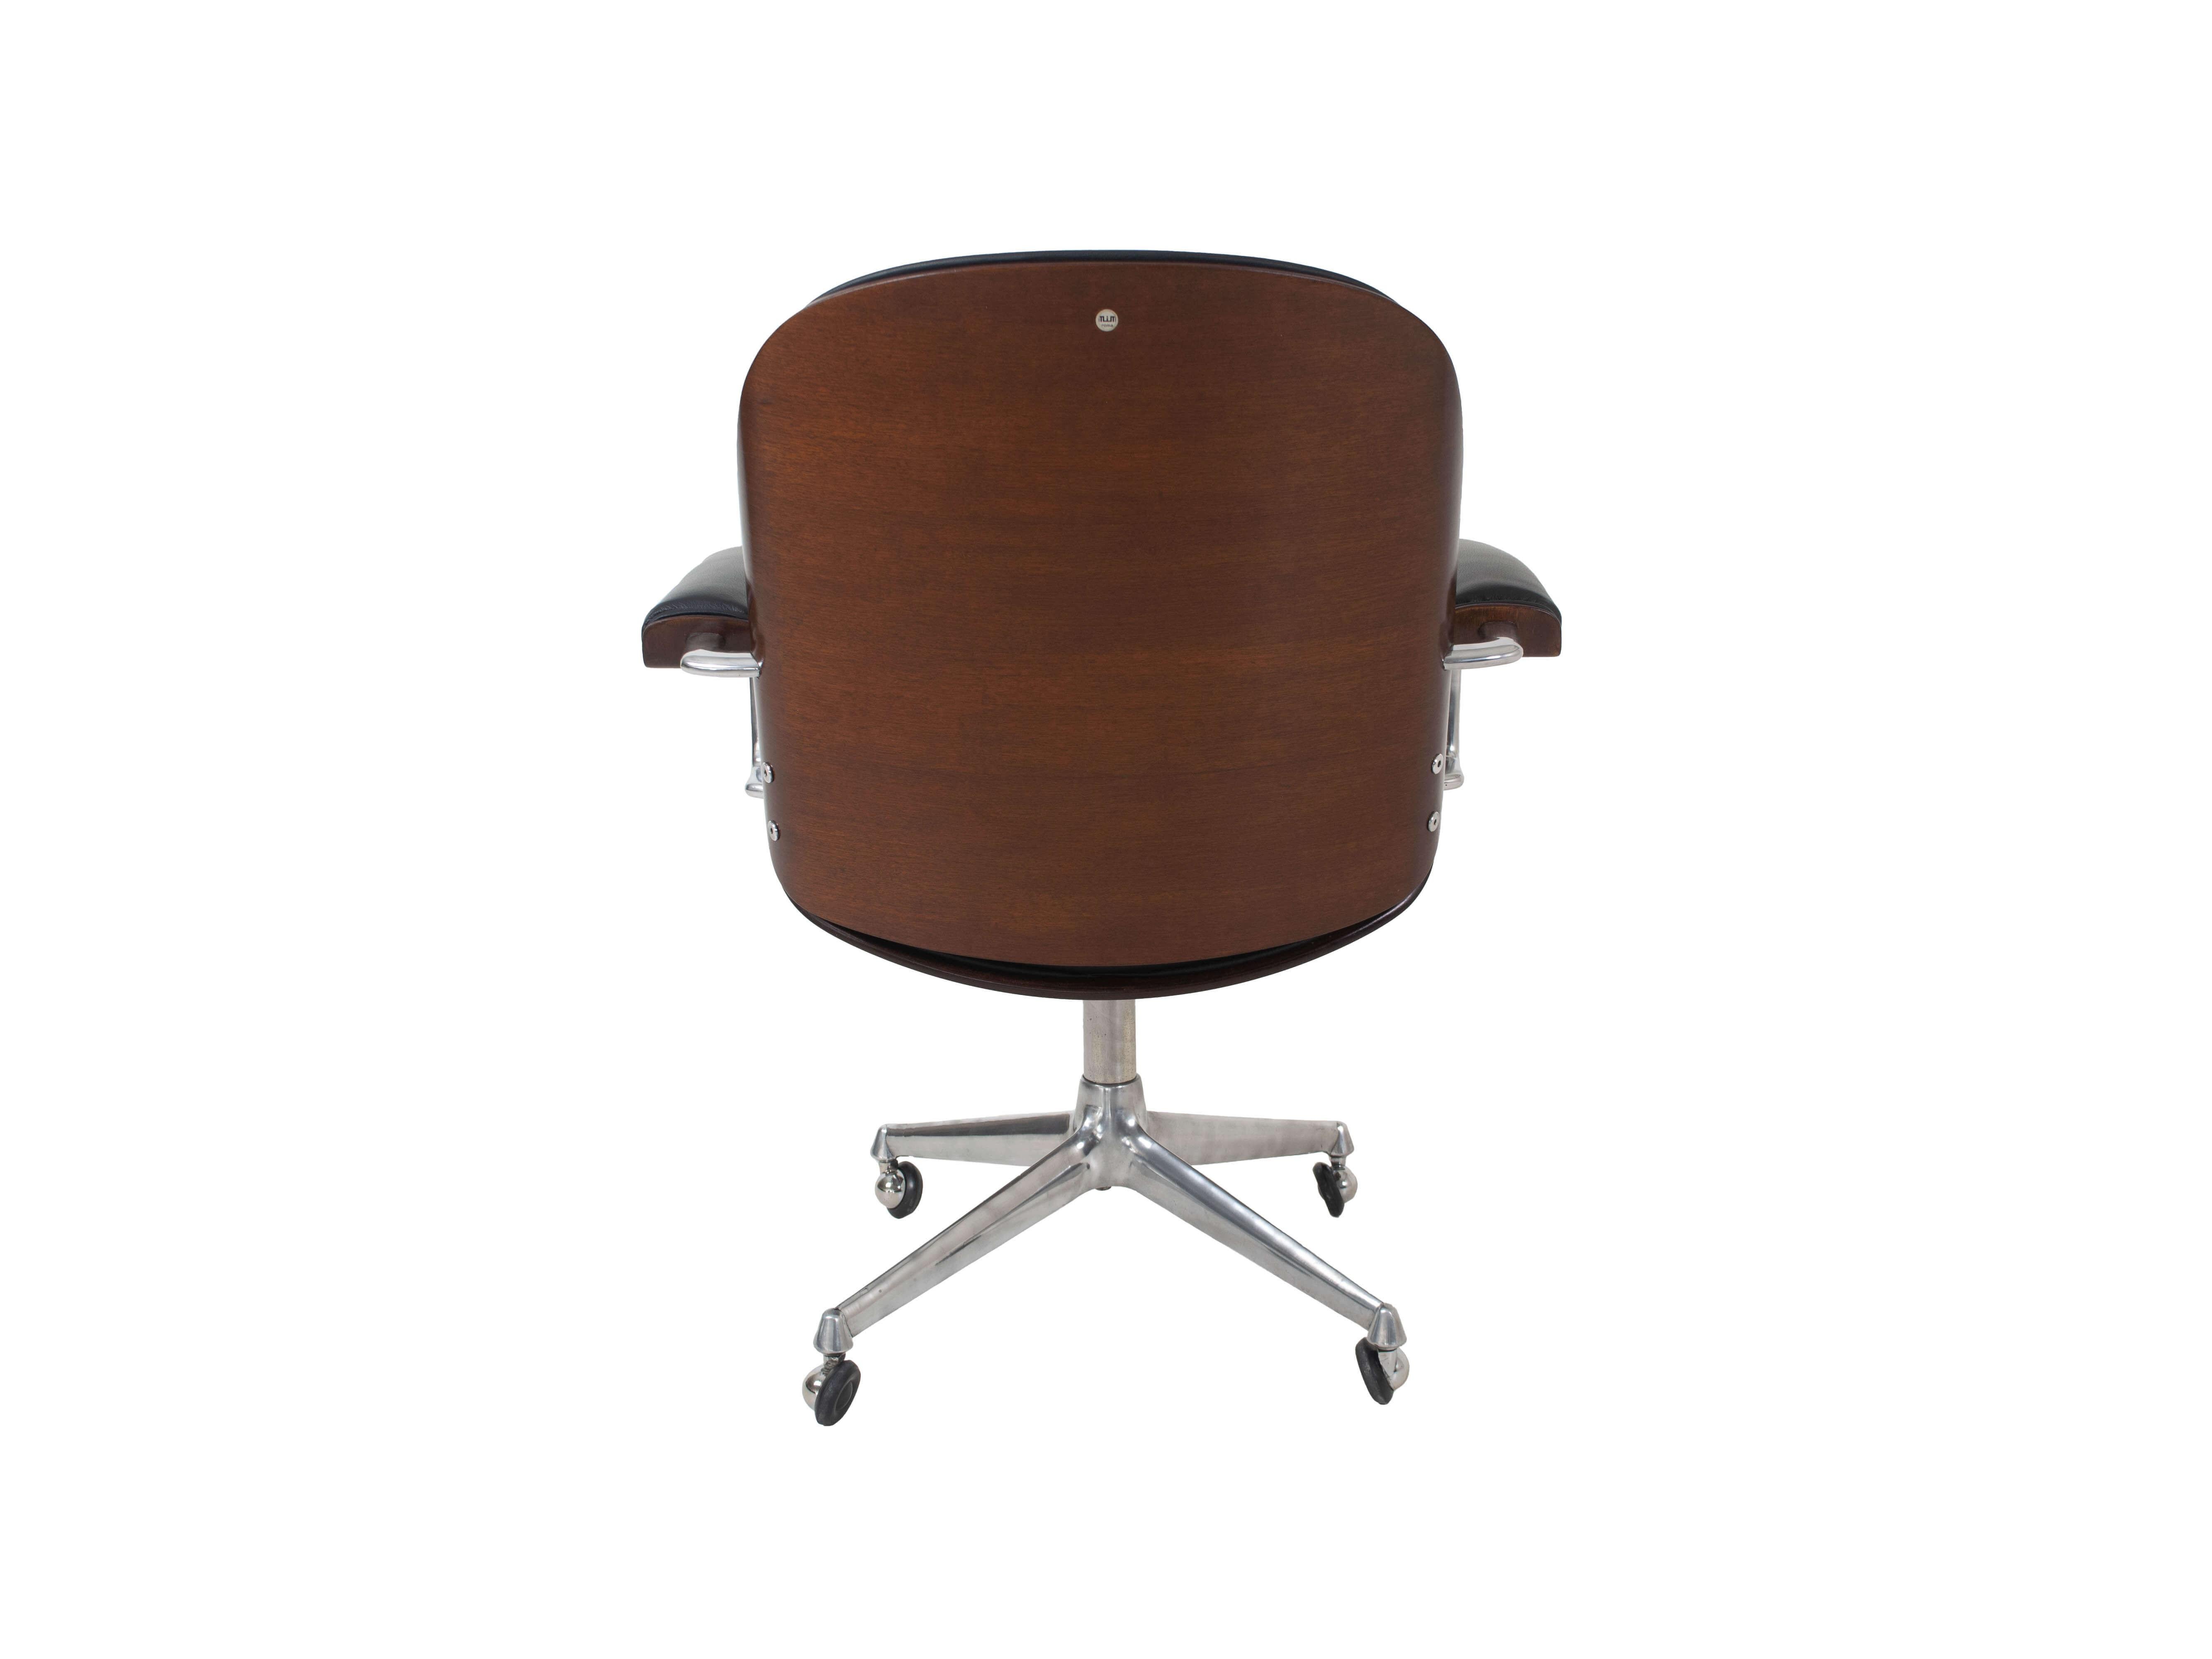 Italian Early Model Ico Parisi Desk Chair with Arm Rests by MIM Roma, Italy 1959 For Sale